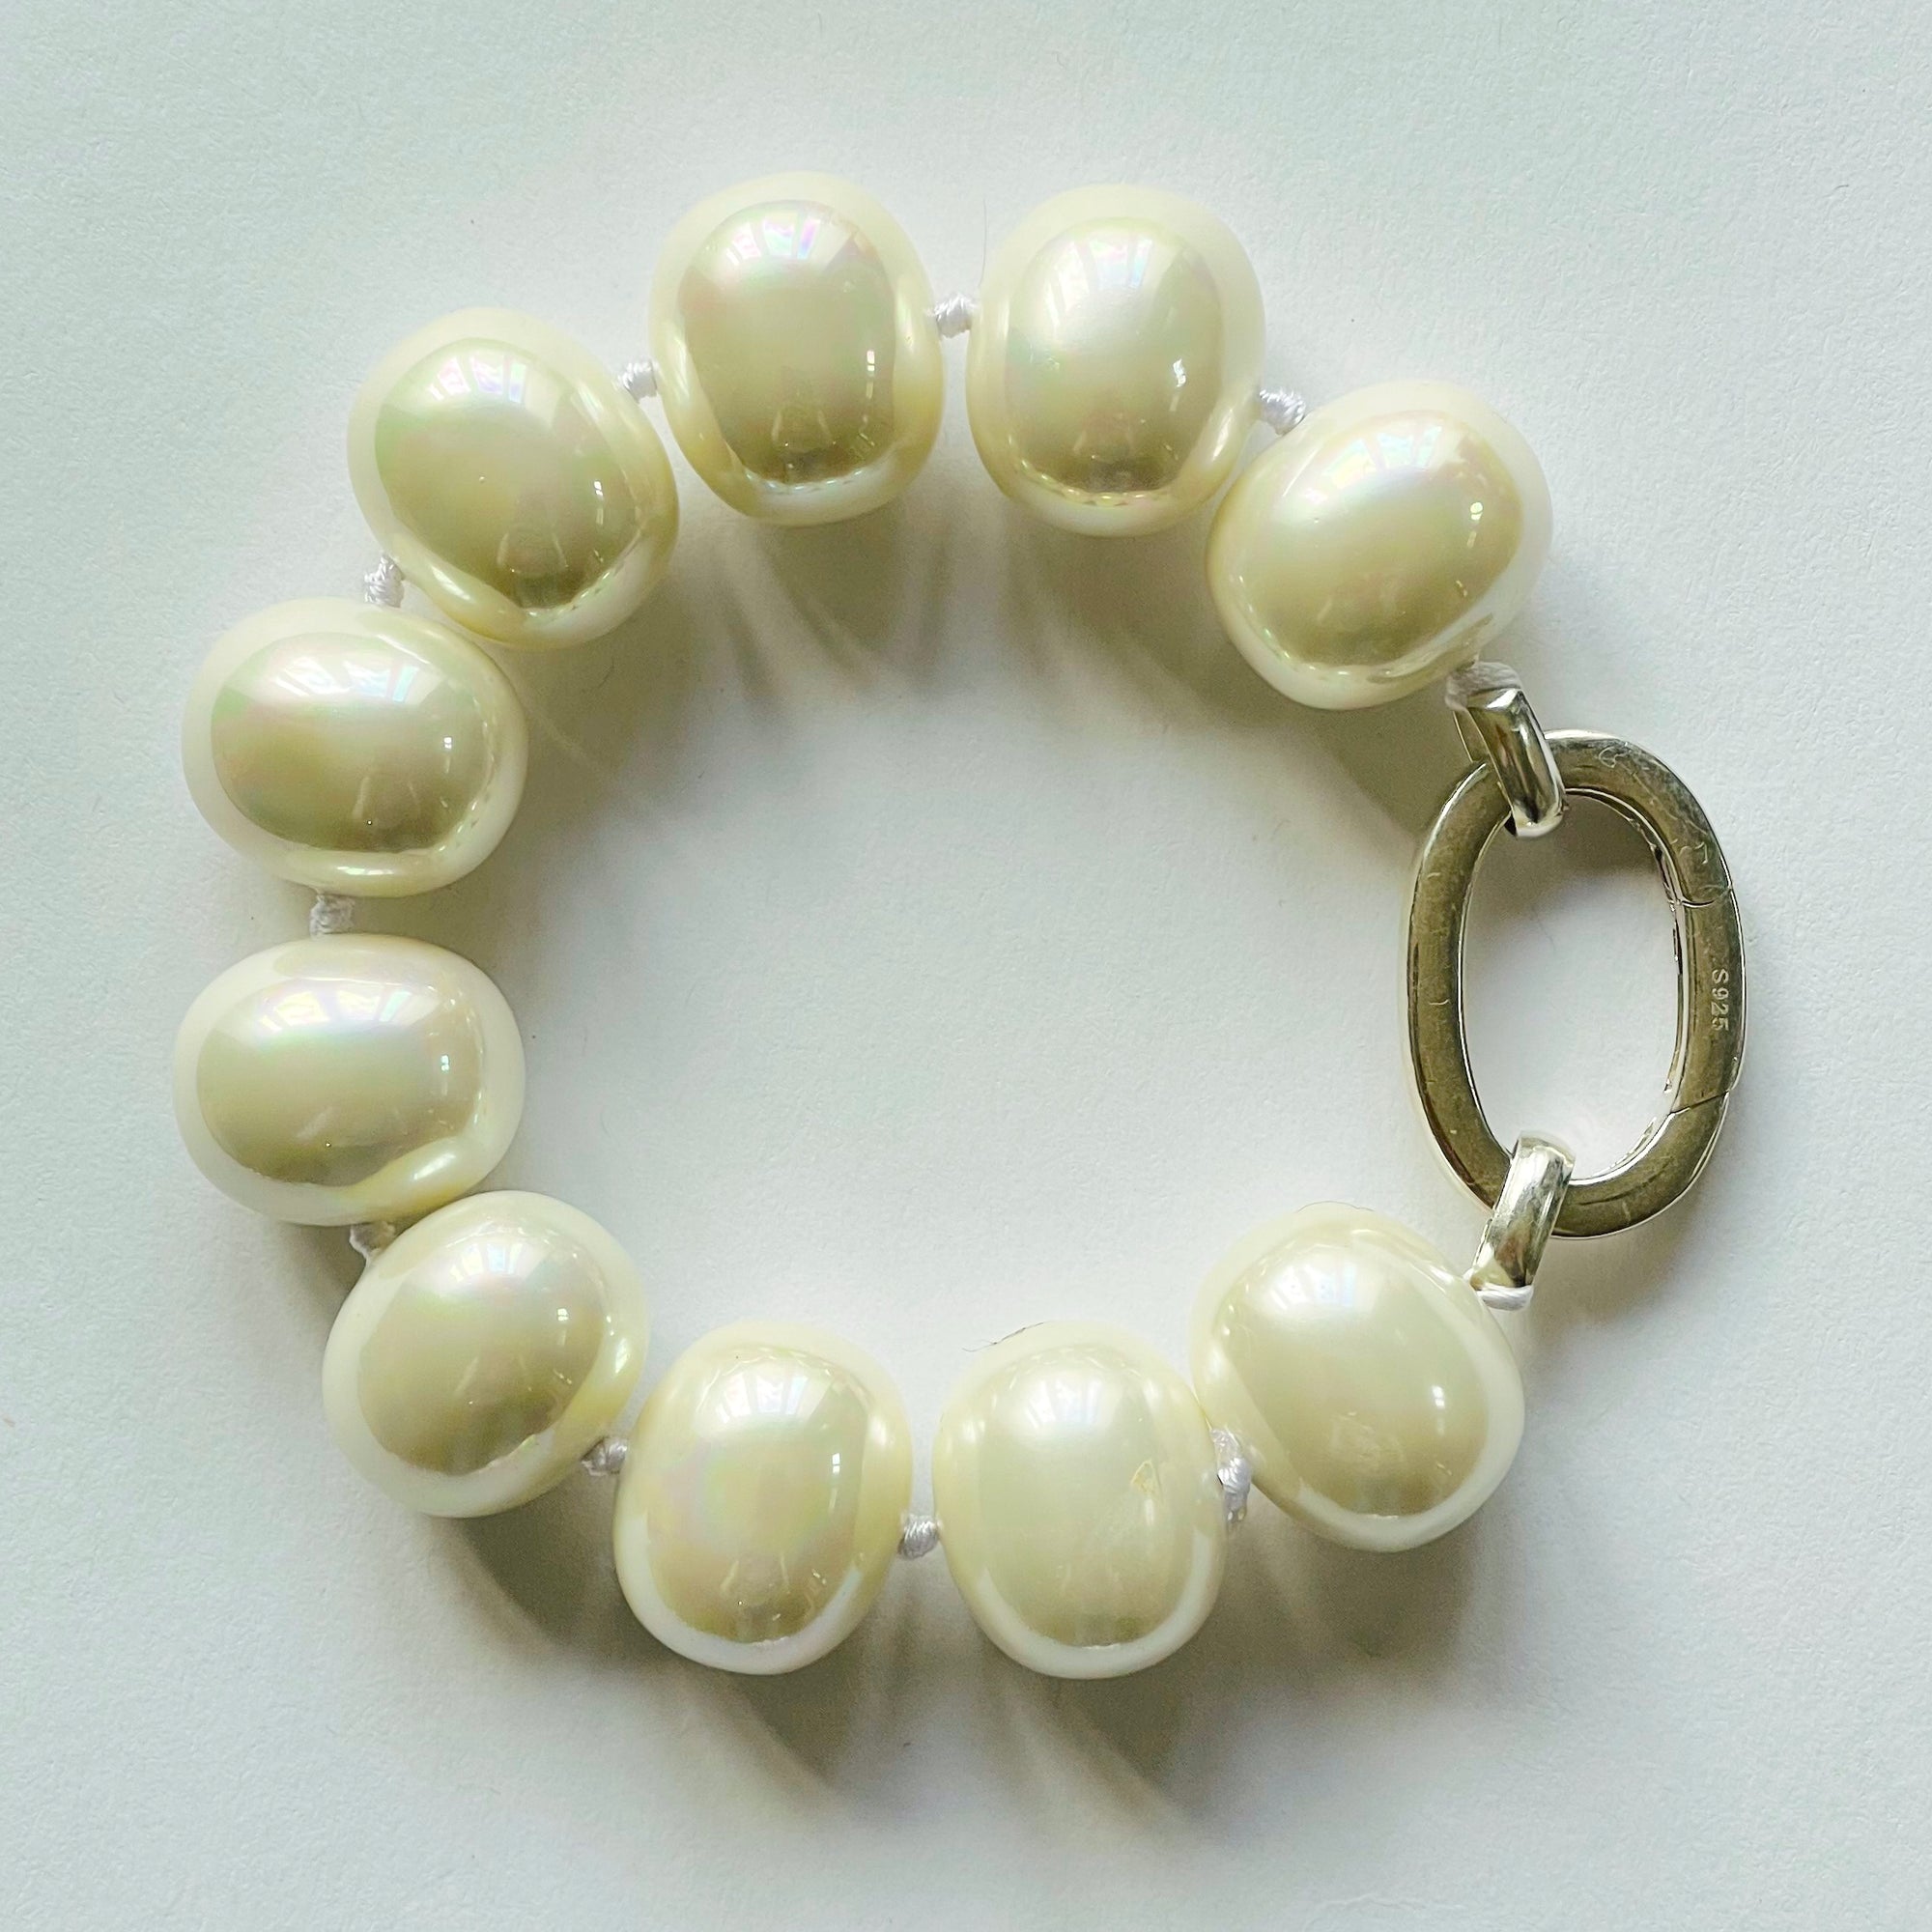 Beautiful handcrafted cuff-style statement bracelet of organic white freshwater shell pearls, approx. 19 m x 11 mm. Hand-knotted with white thread, bracelet measures 21 cm (8.25 in.). Elegant on its own and perfect with a charm or two. Adorned with .925 sterling silver oval clasp.